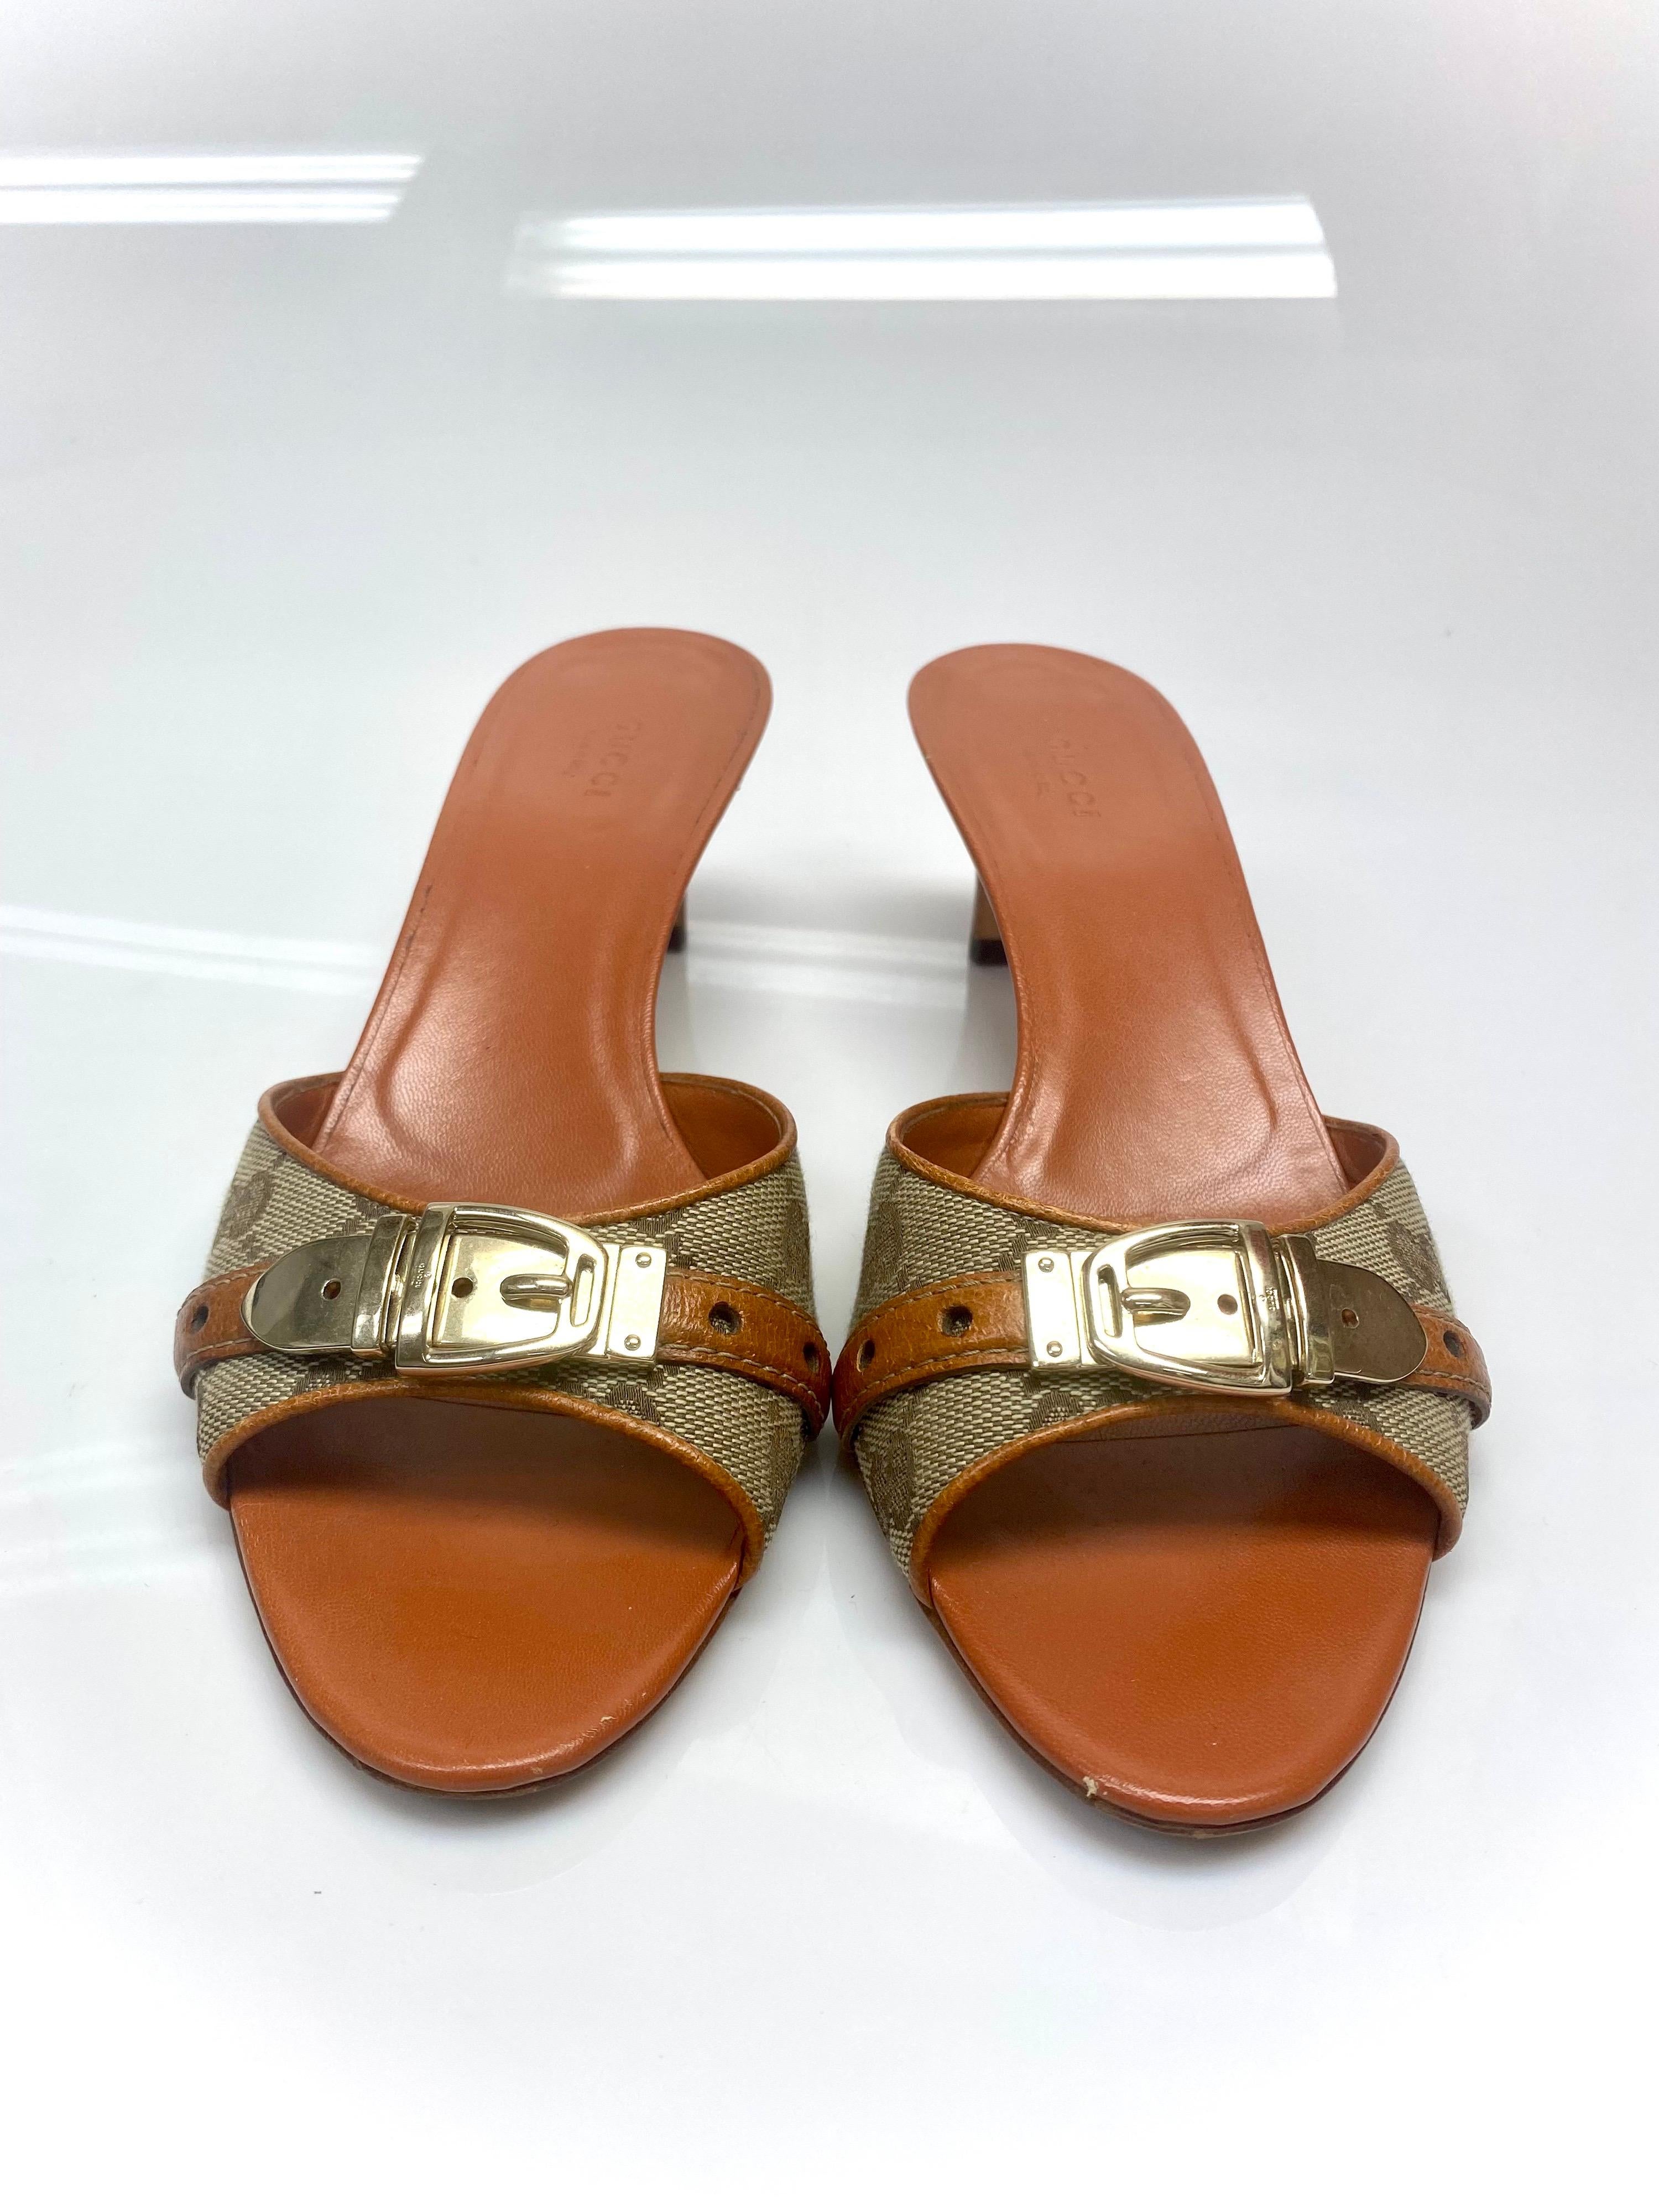 These gorgeous leather Gucci logo kitten heels/mules' will be a perfect shoe to add to any luxury collection. The shoe features a silver centered buckle and Gucci monogram through the design which is highlighted by the brown leather. Item is in very